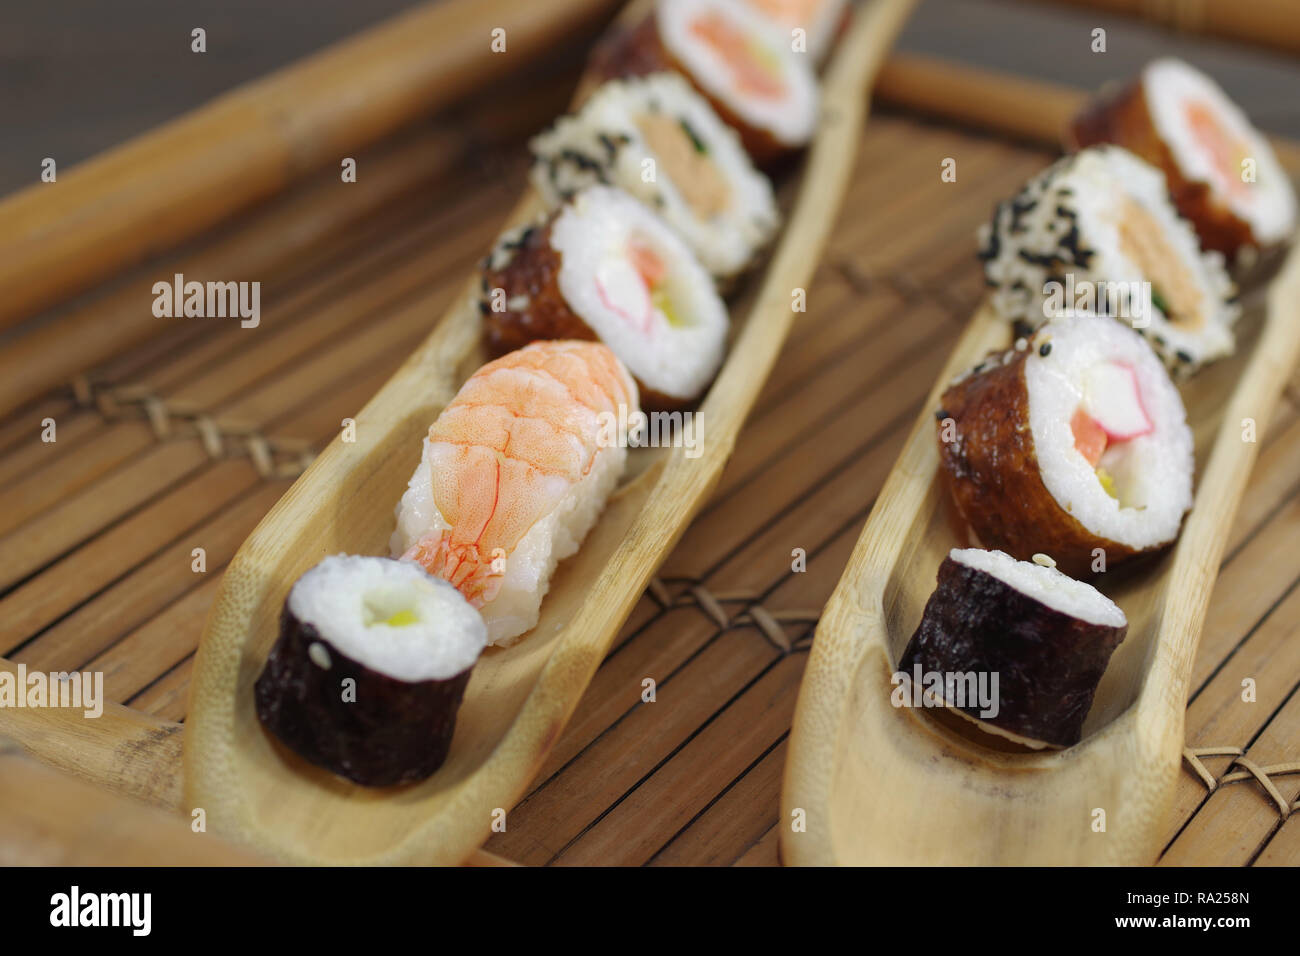 portion sushi and wooden hopsticks on plate Stock Photo